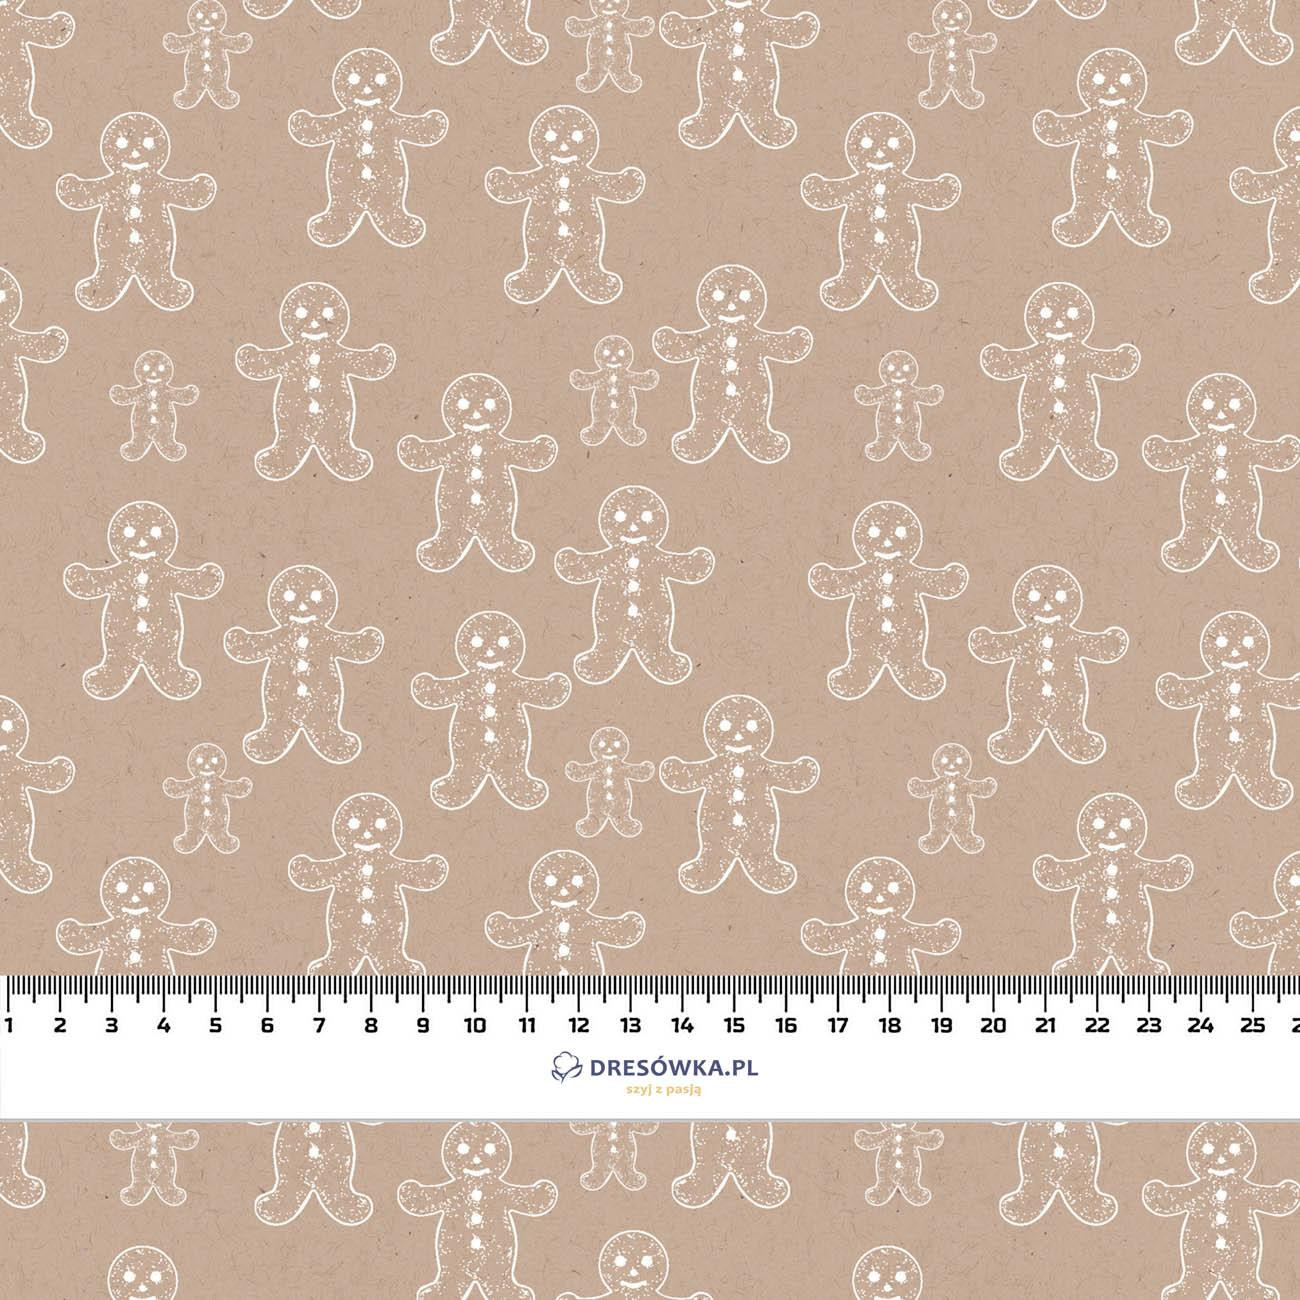 GINGERBREAD MEN (WHITE CHRISTMAS) - looped knit fabric